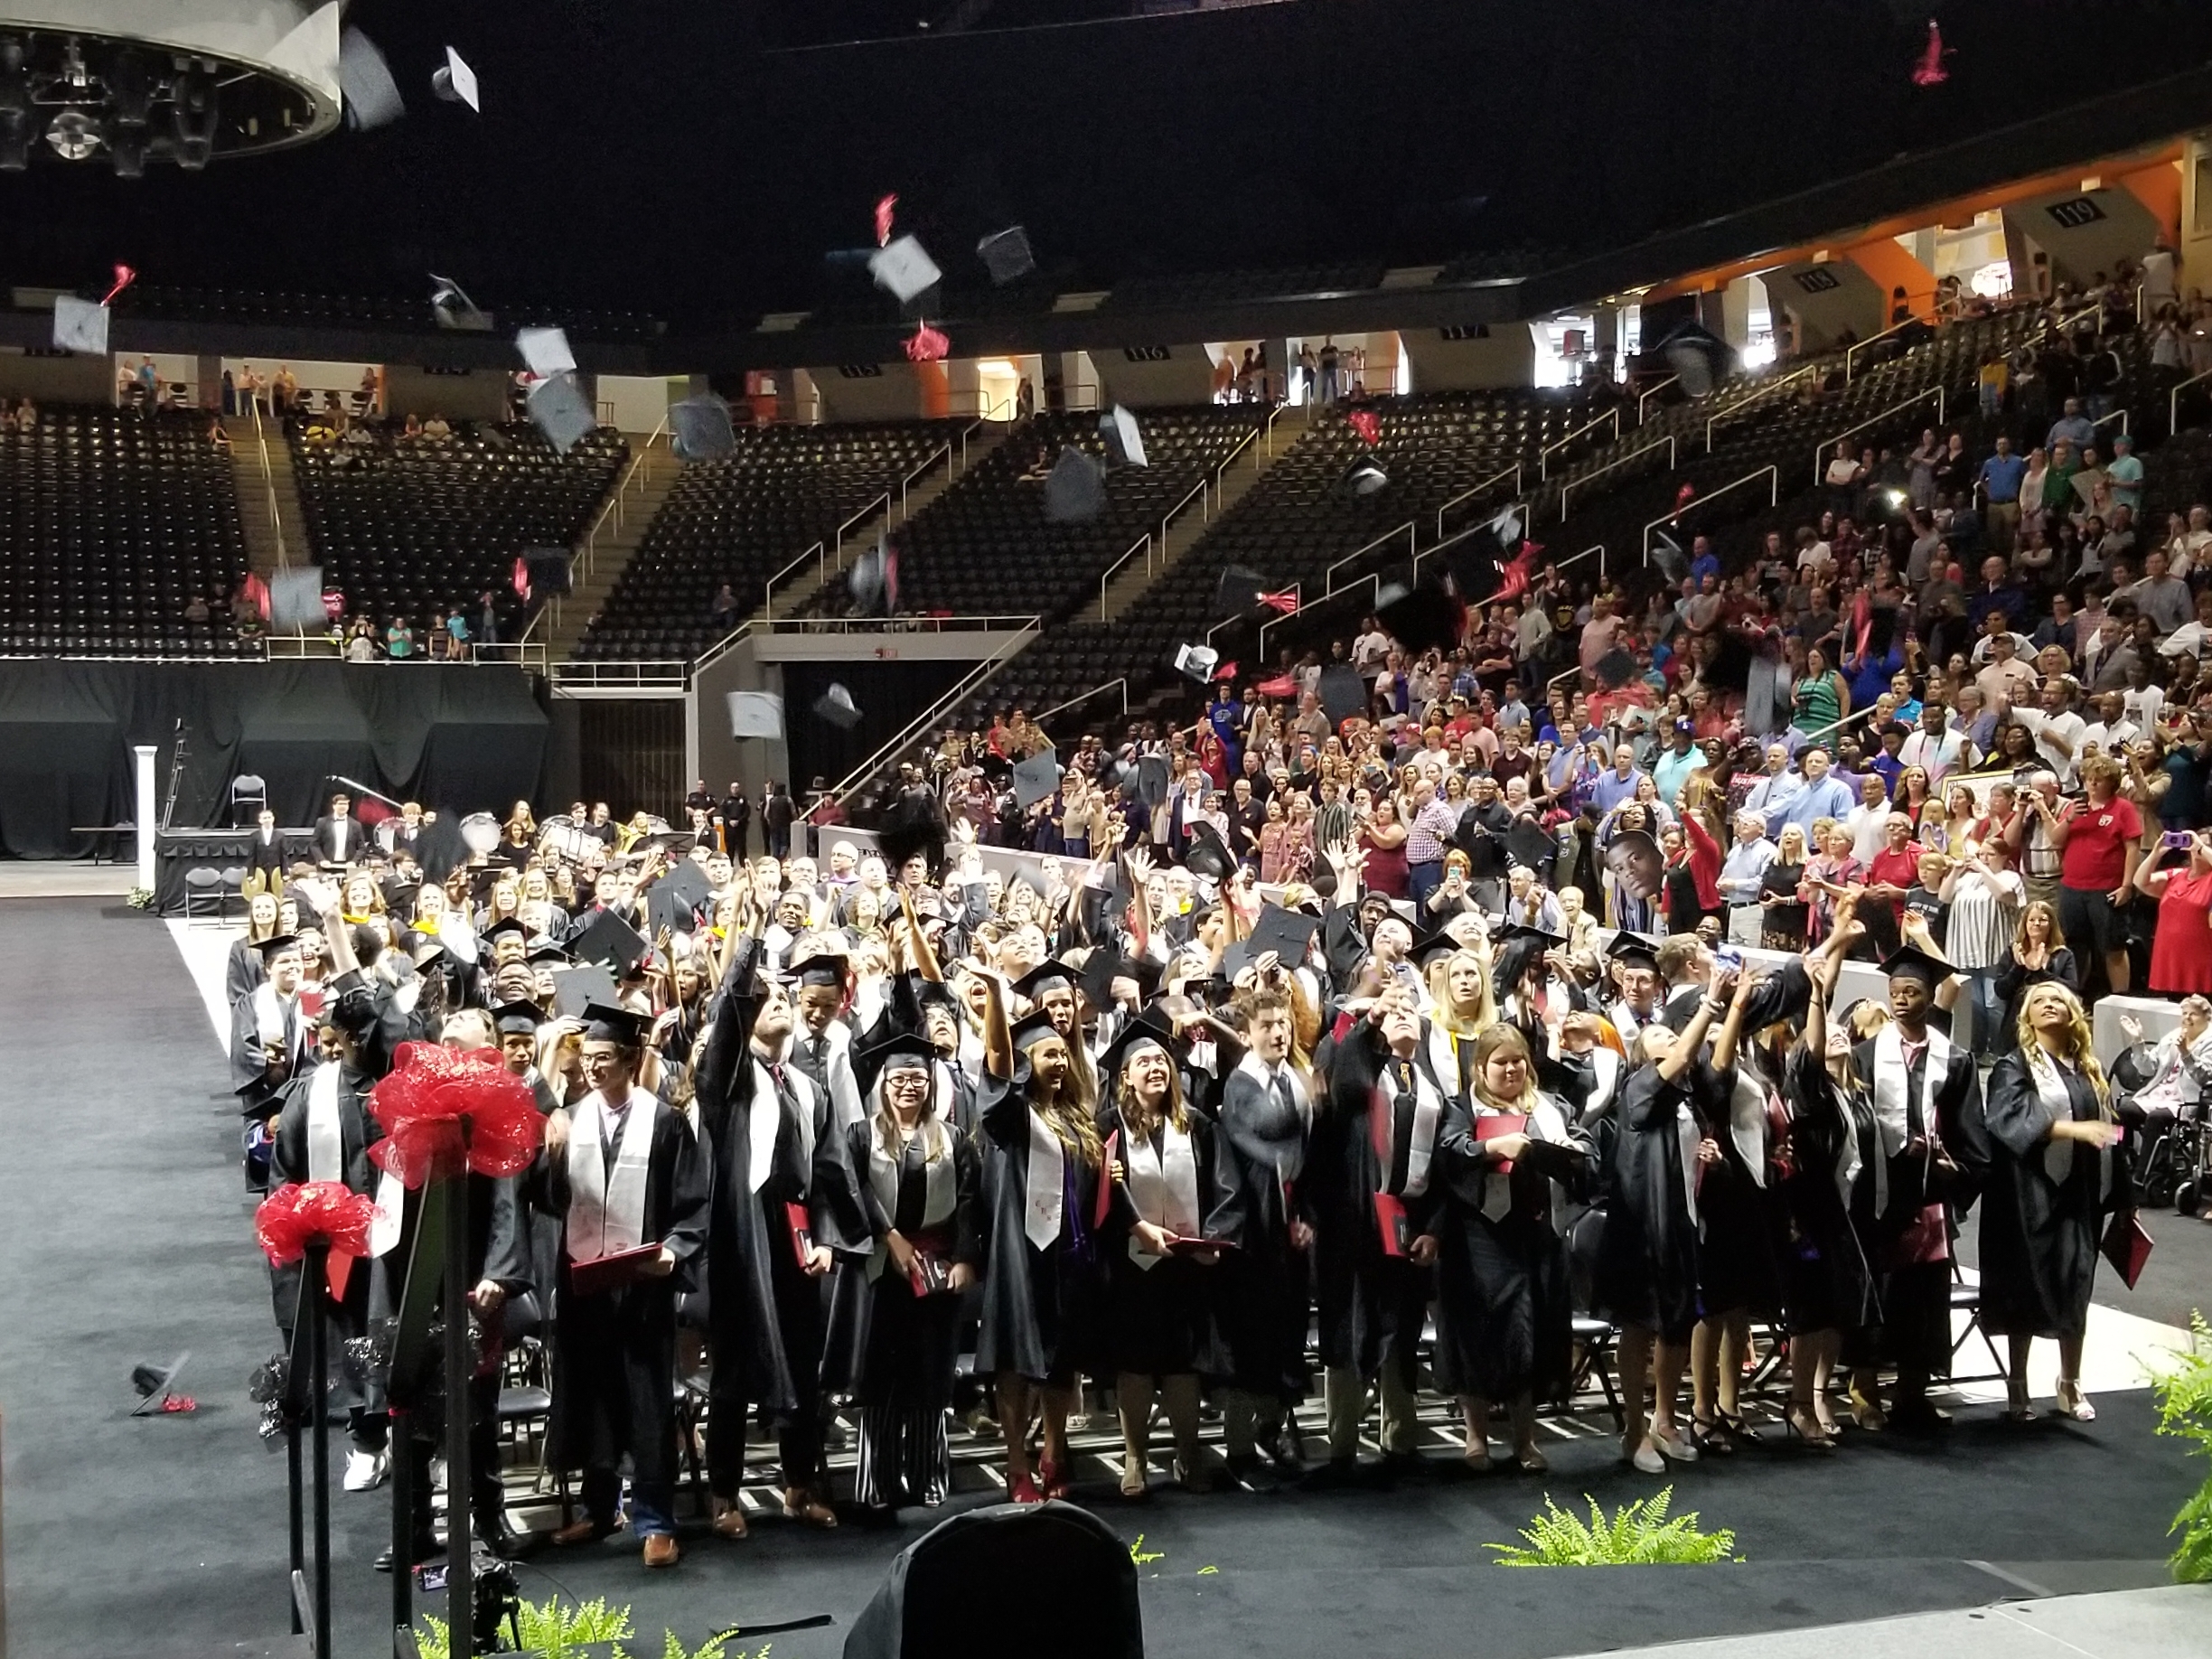 Central High School Graduation at Thompson-Boling Arena, May 14, 2019